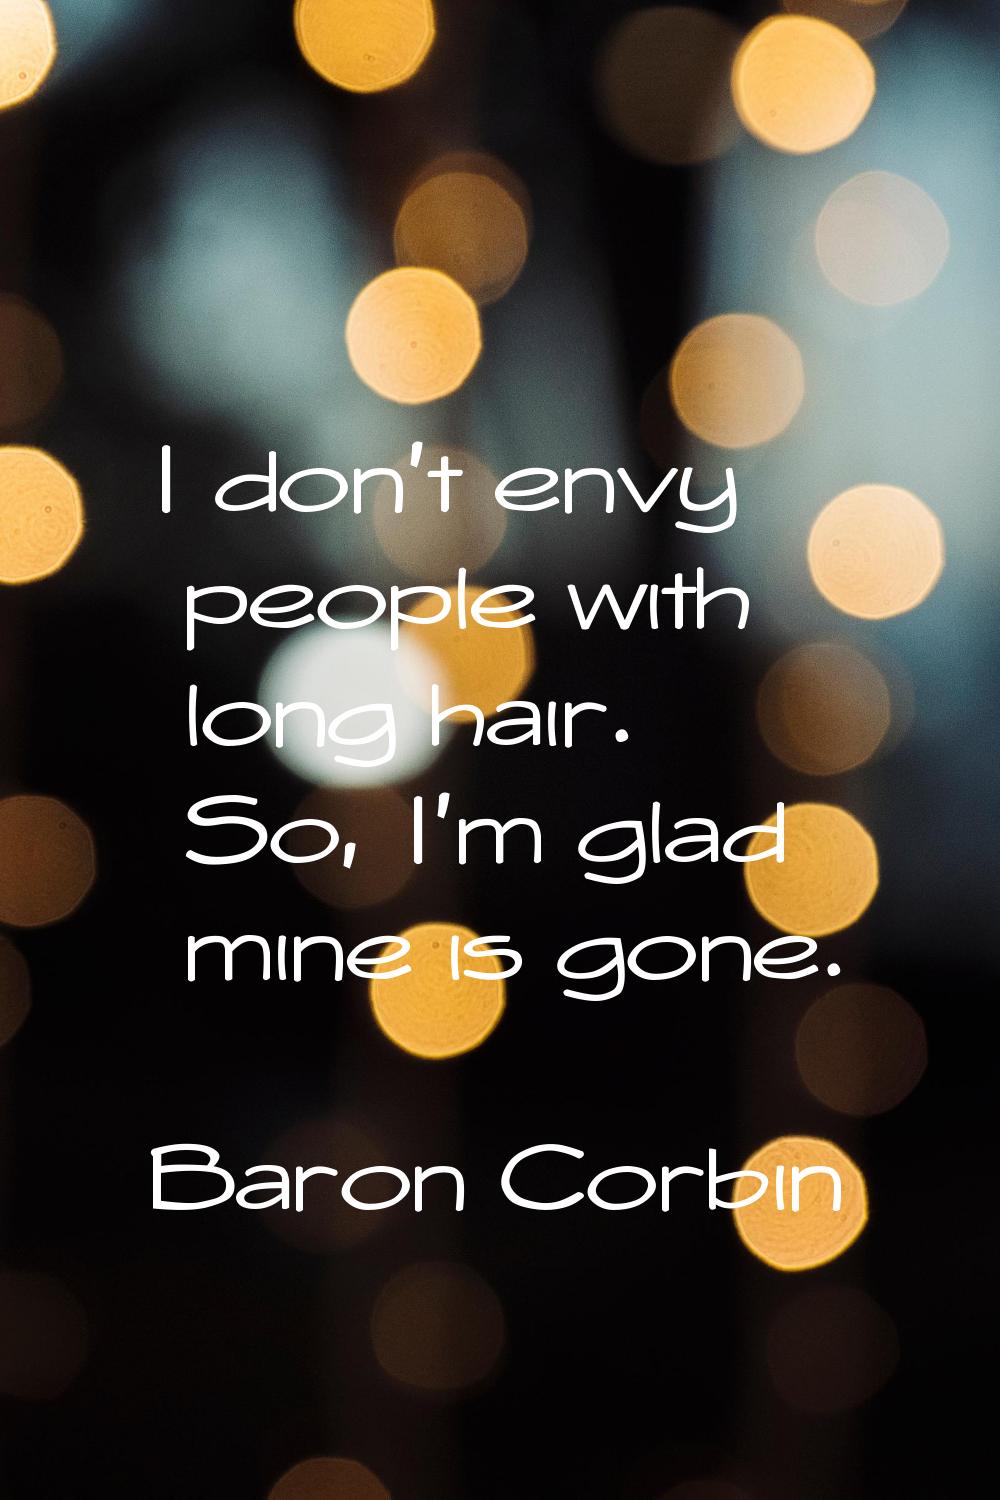 I don't envy people with long hair. So, I'm glad mine is gone.